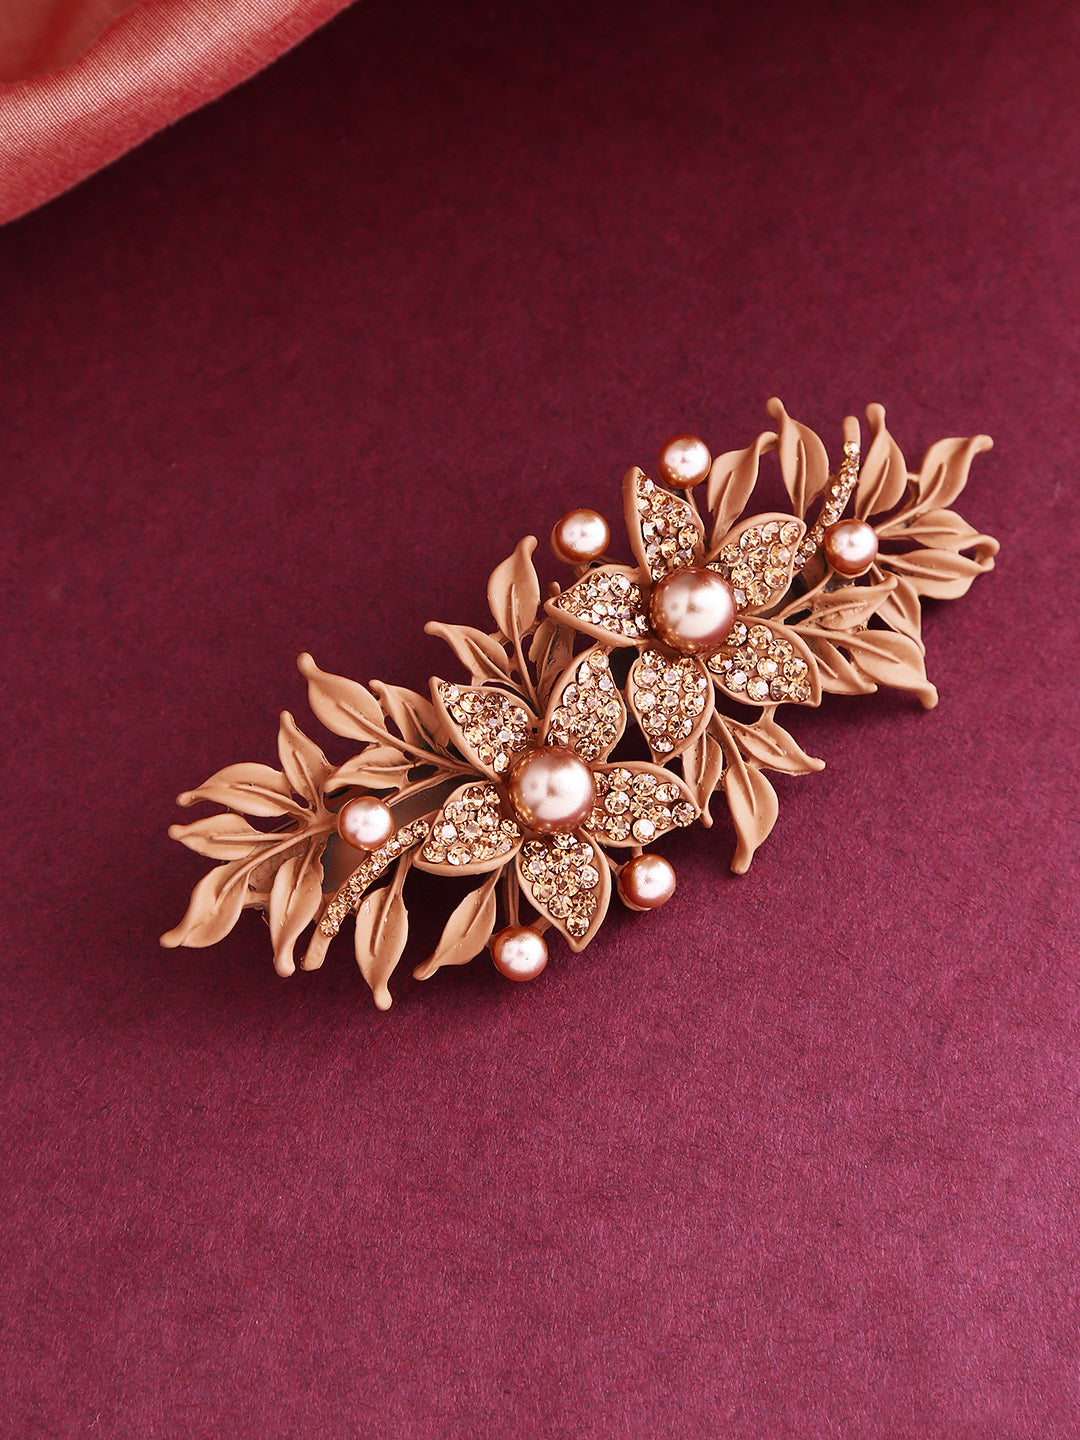 Matte Finish Stones And Pearls Studded Floral Brown Hair Clip